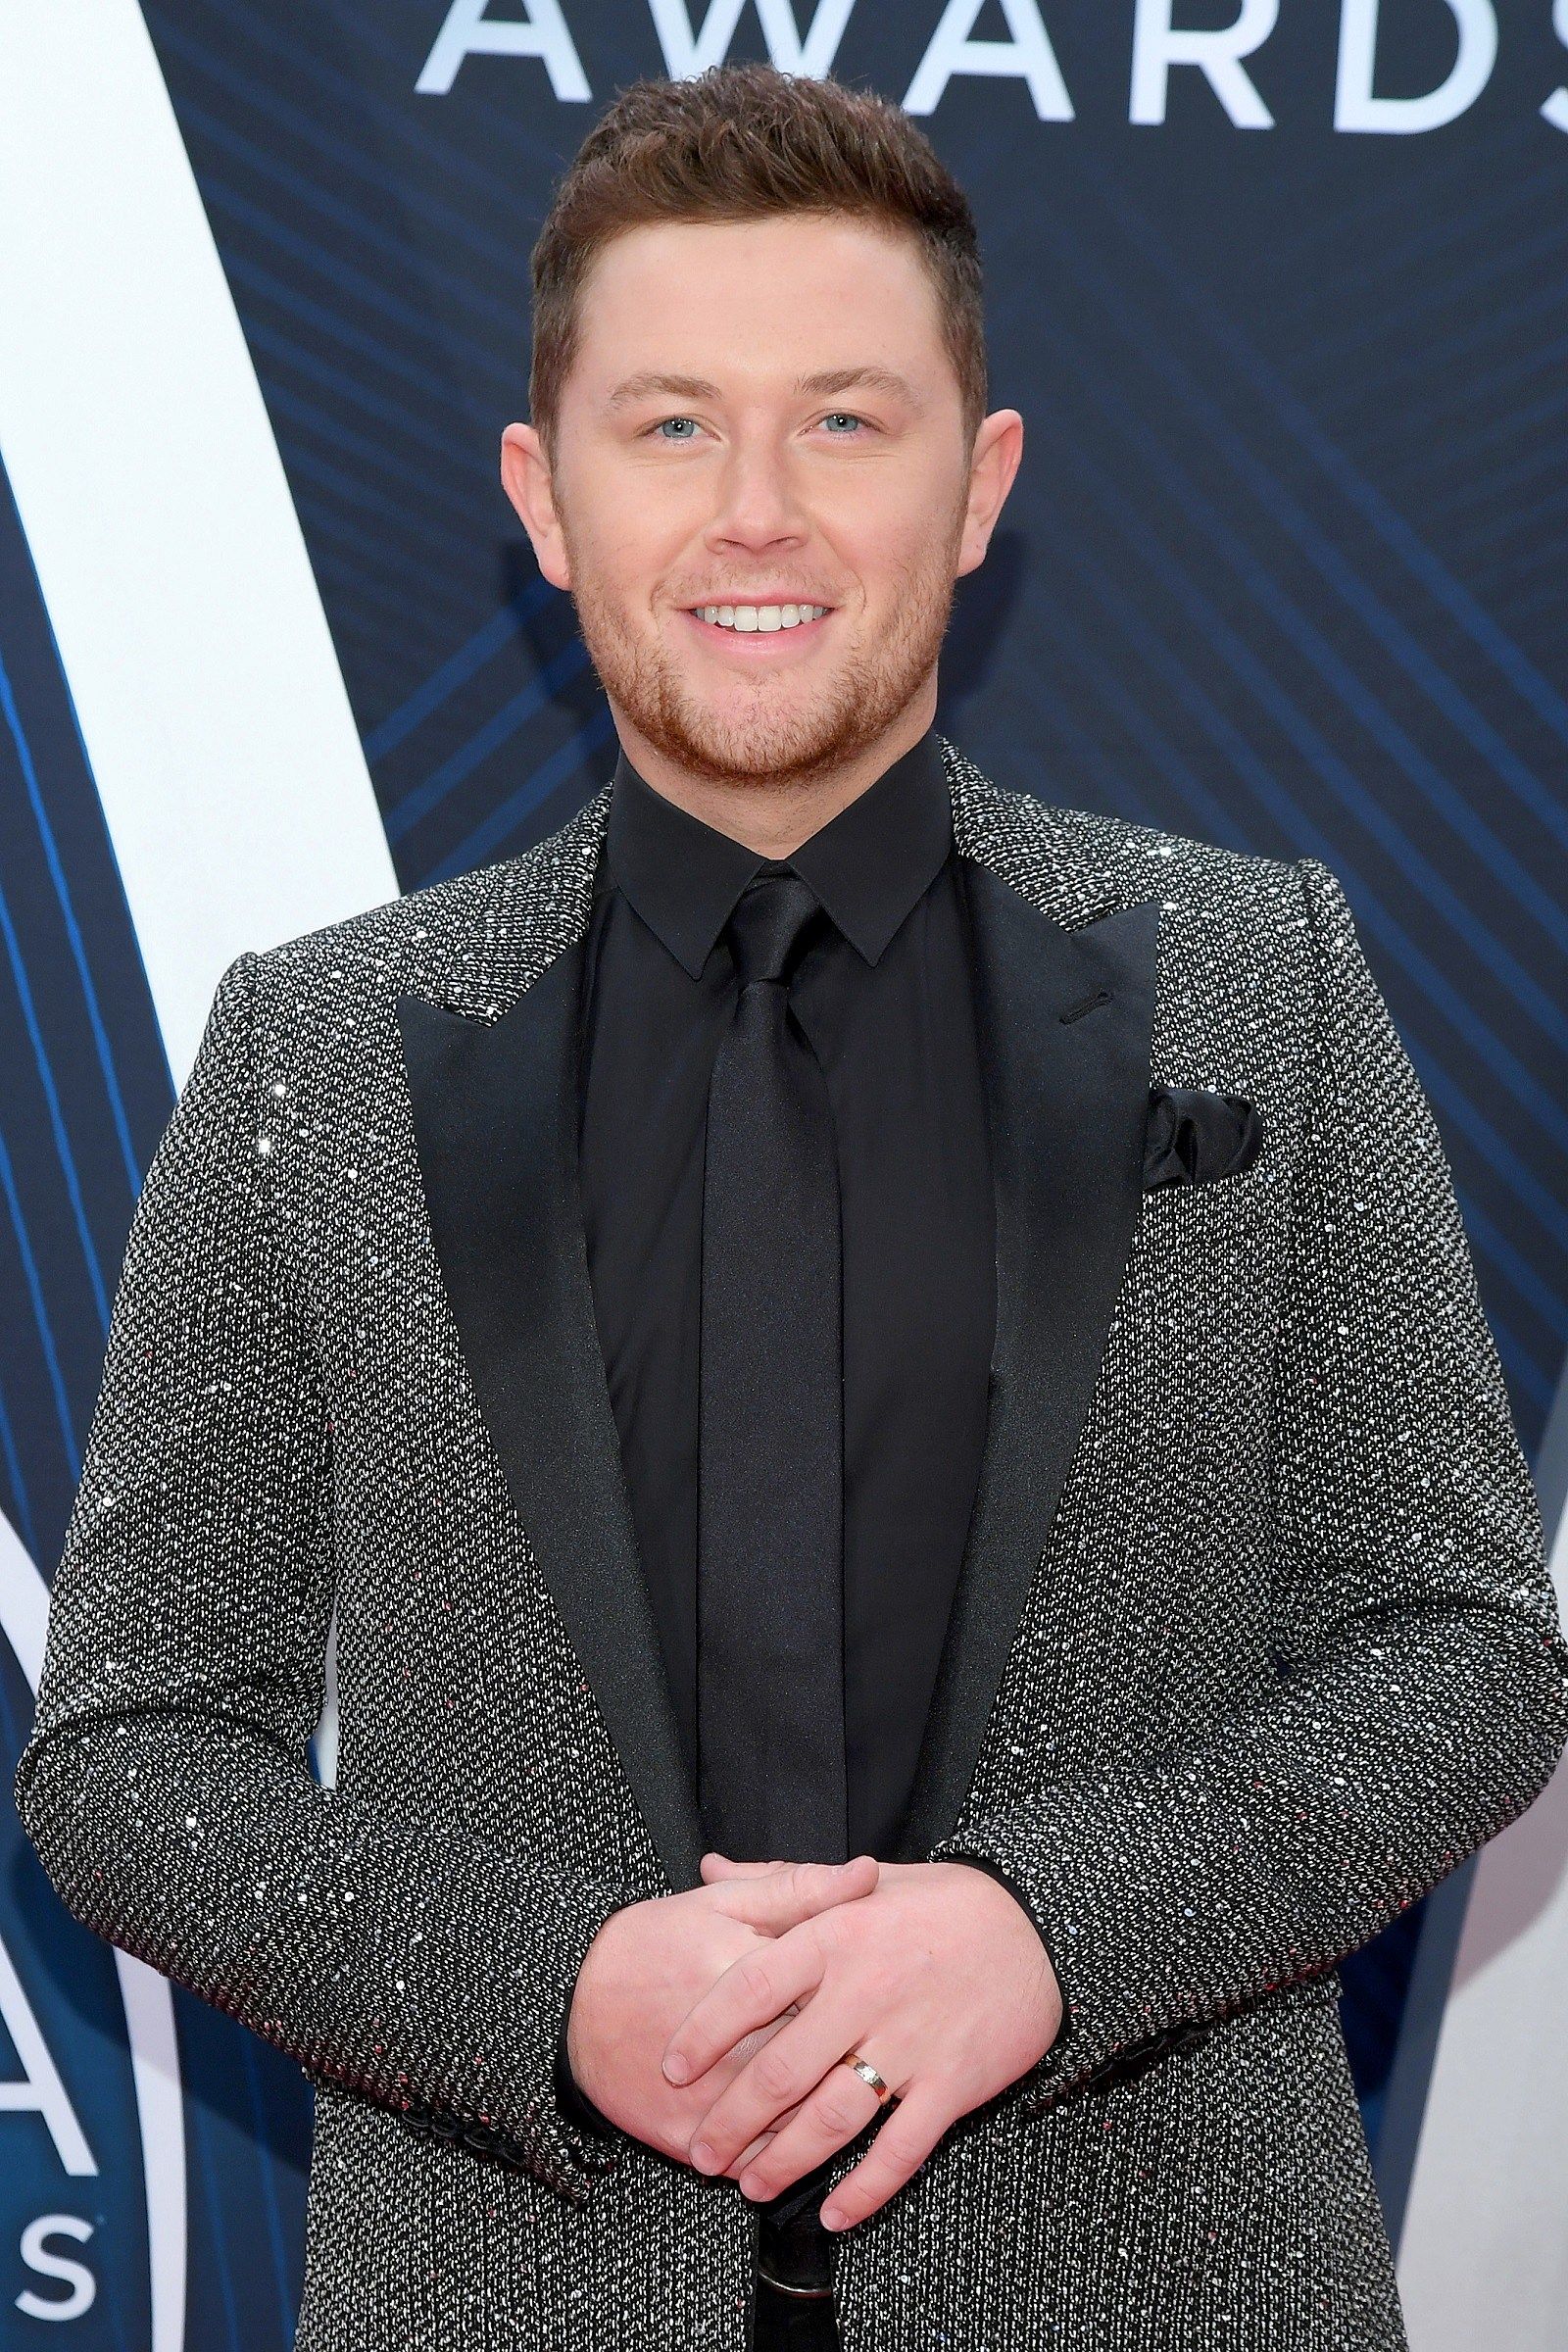 Scotty McCreery wearing a tweed blazer over a black shirt and neck tie